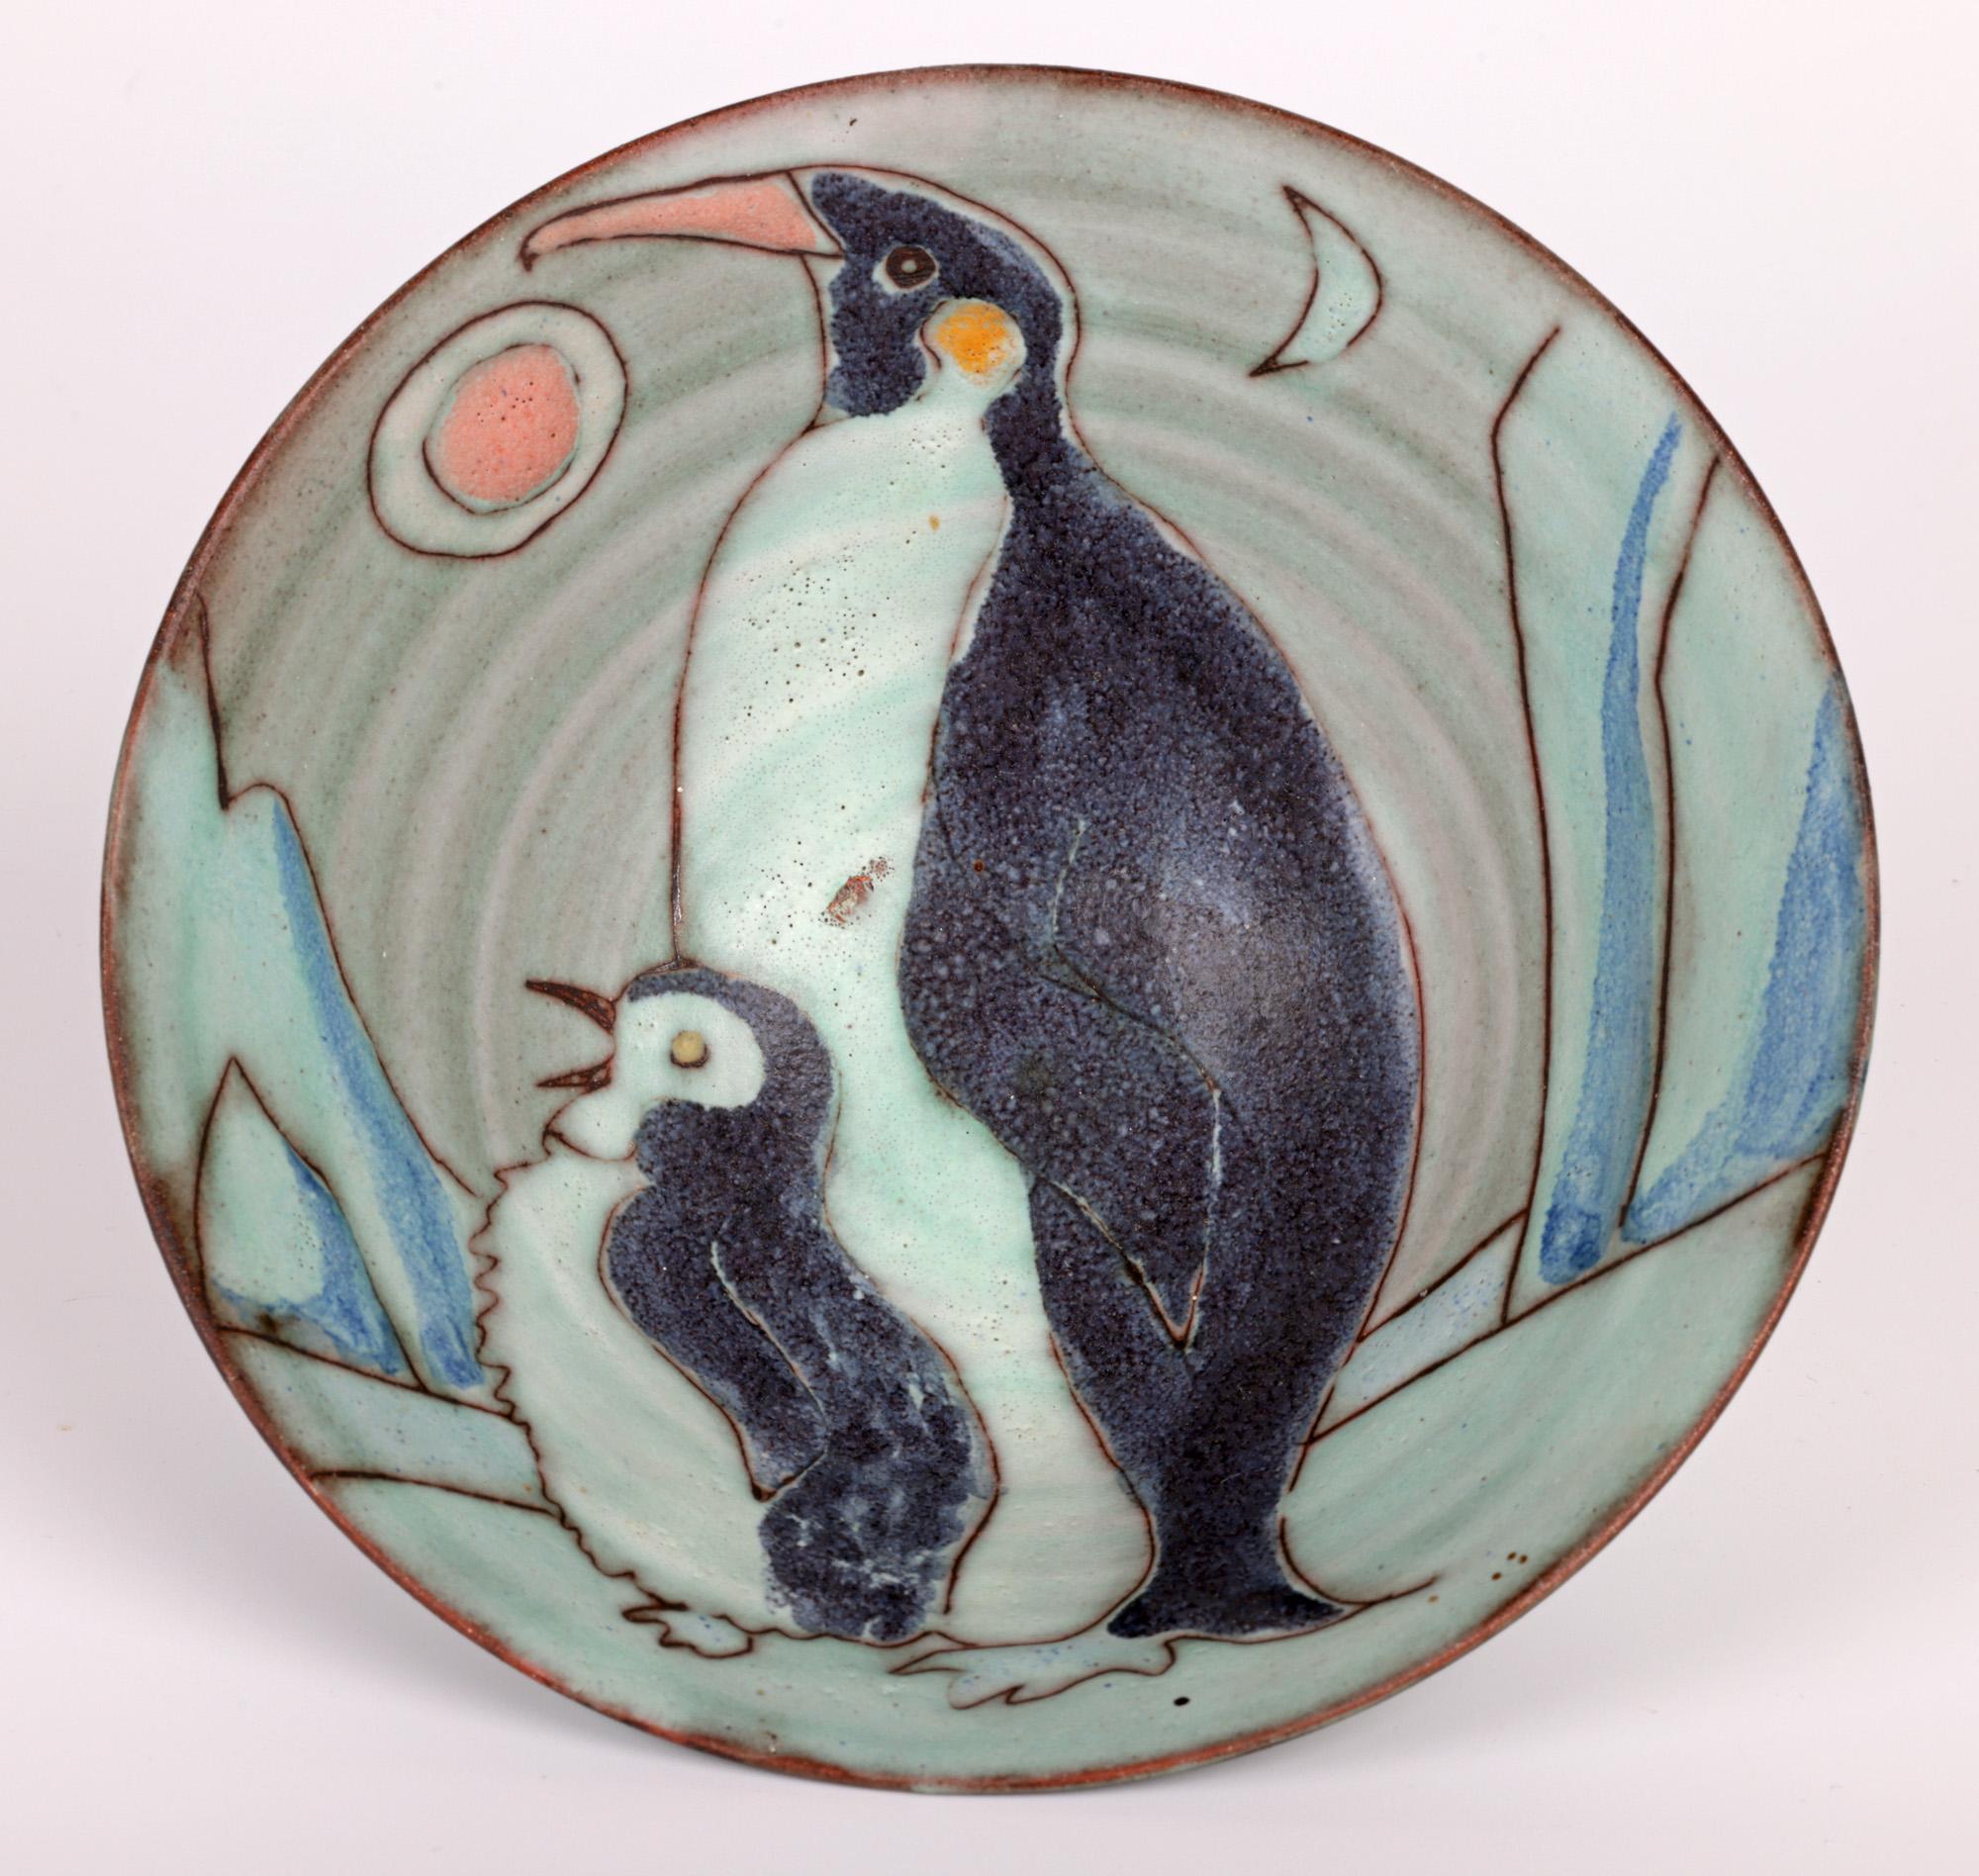 Glazed Tessa Fuchs Studio Pottery Bowl Hand Decorated with Penguins For Sale